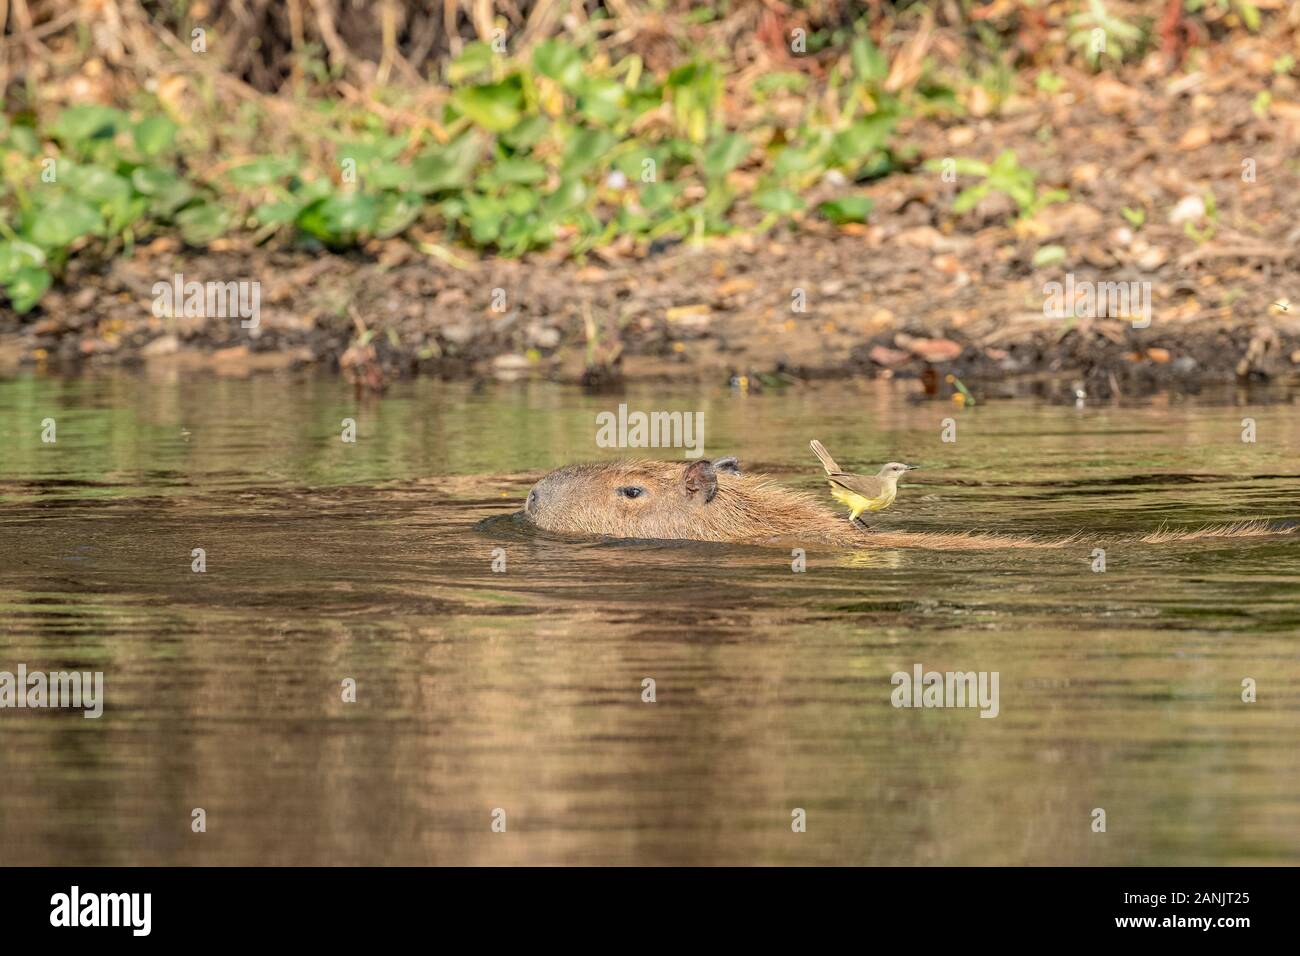 white-lored spinetail (Synallaxis albilora), hitching a ride on the back of capybara female swimming to cross the river (Hydrochoerus hydrochaeris) is Stock Photo